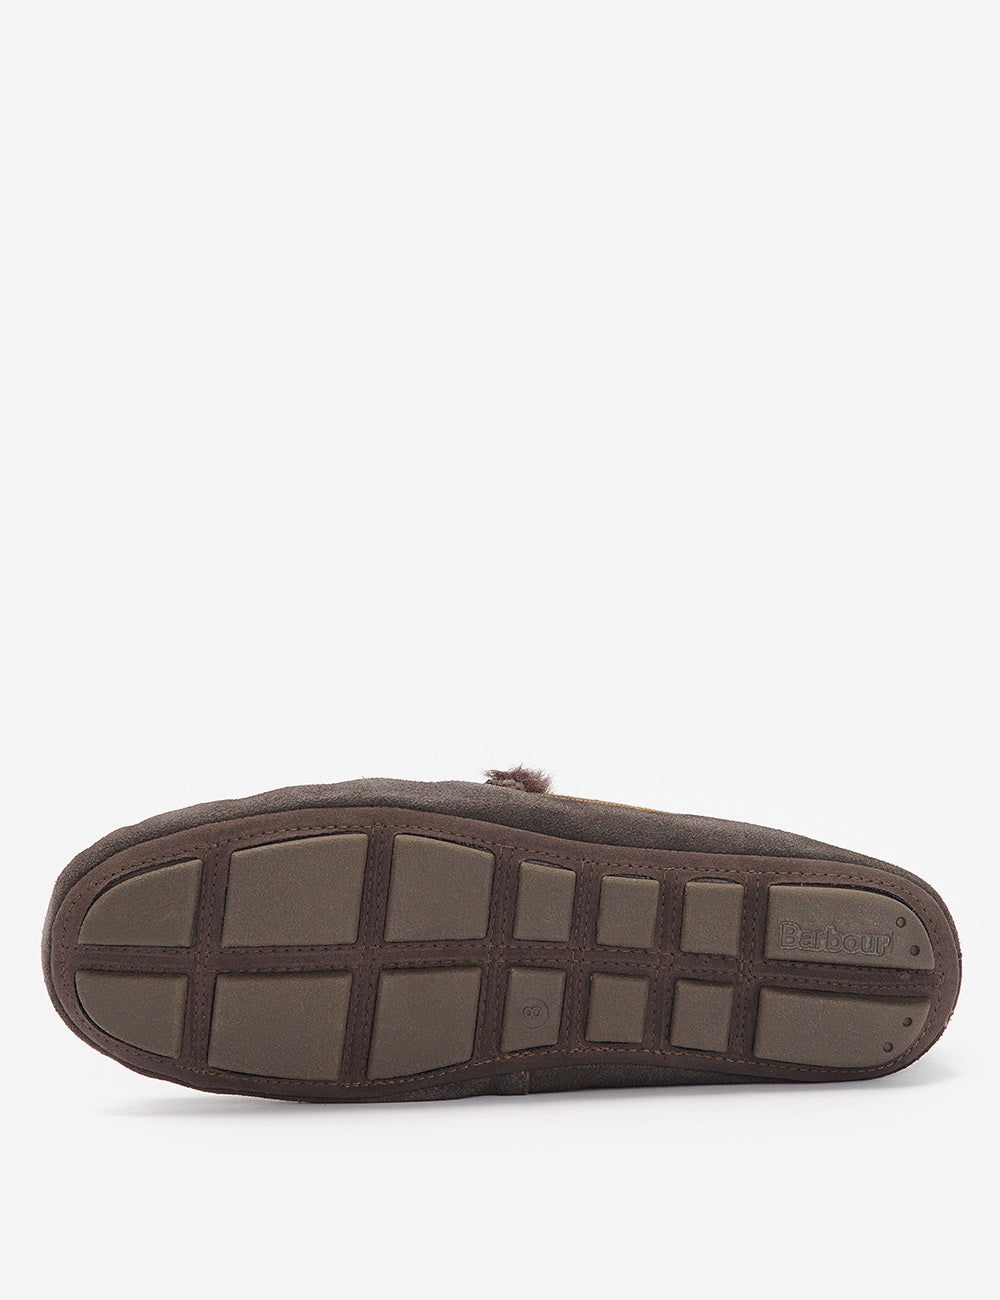 Barbour Monty Slippers - Brown Suede